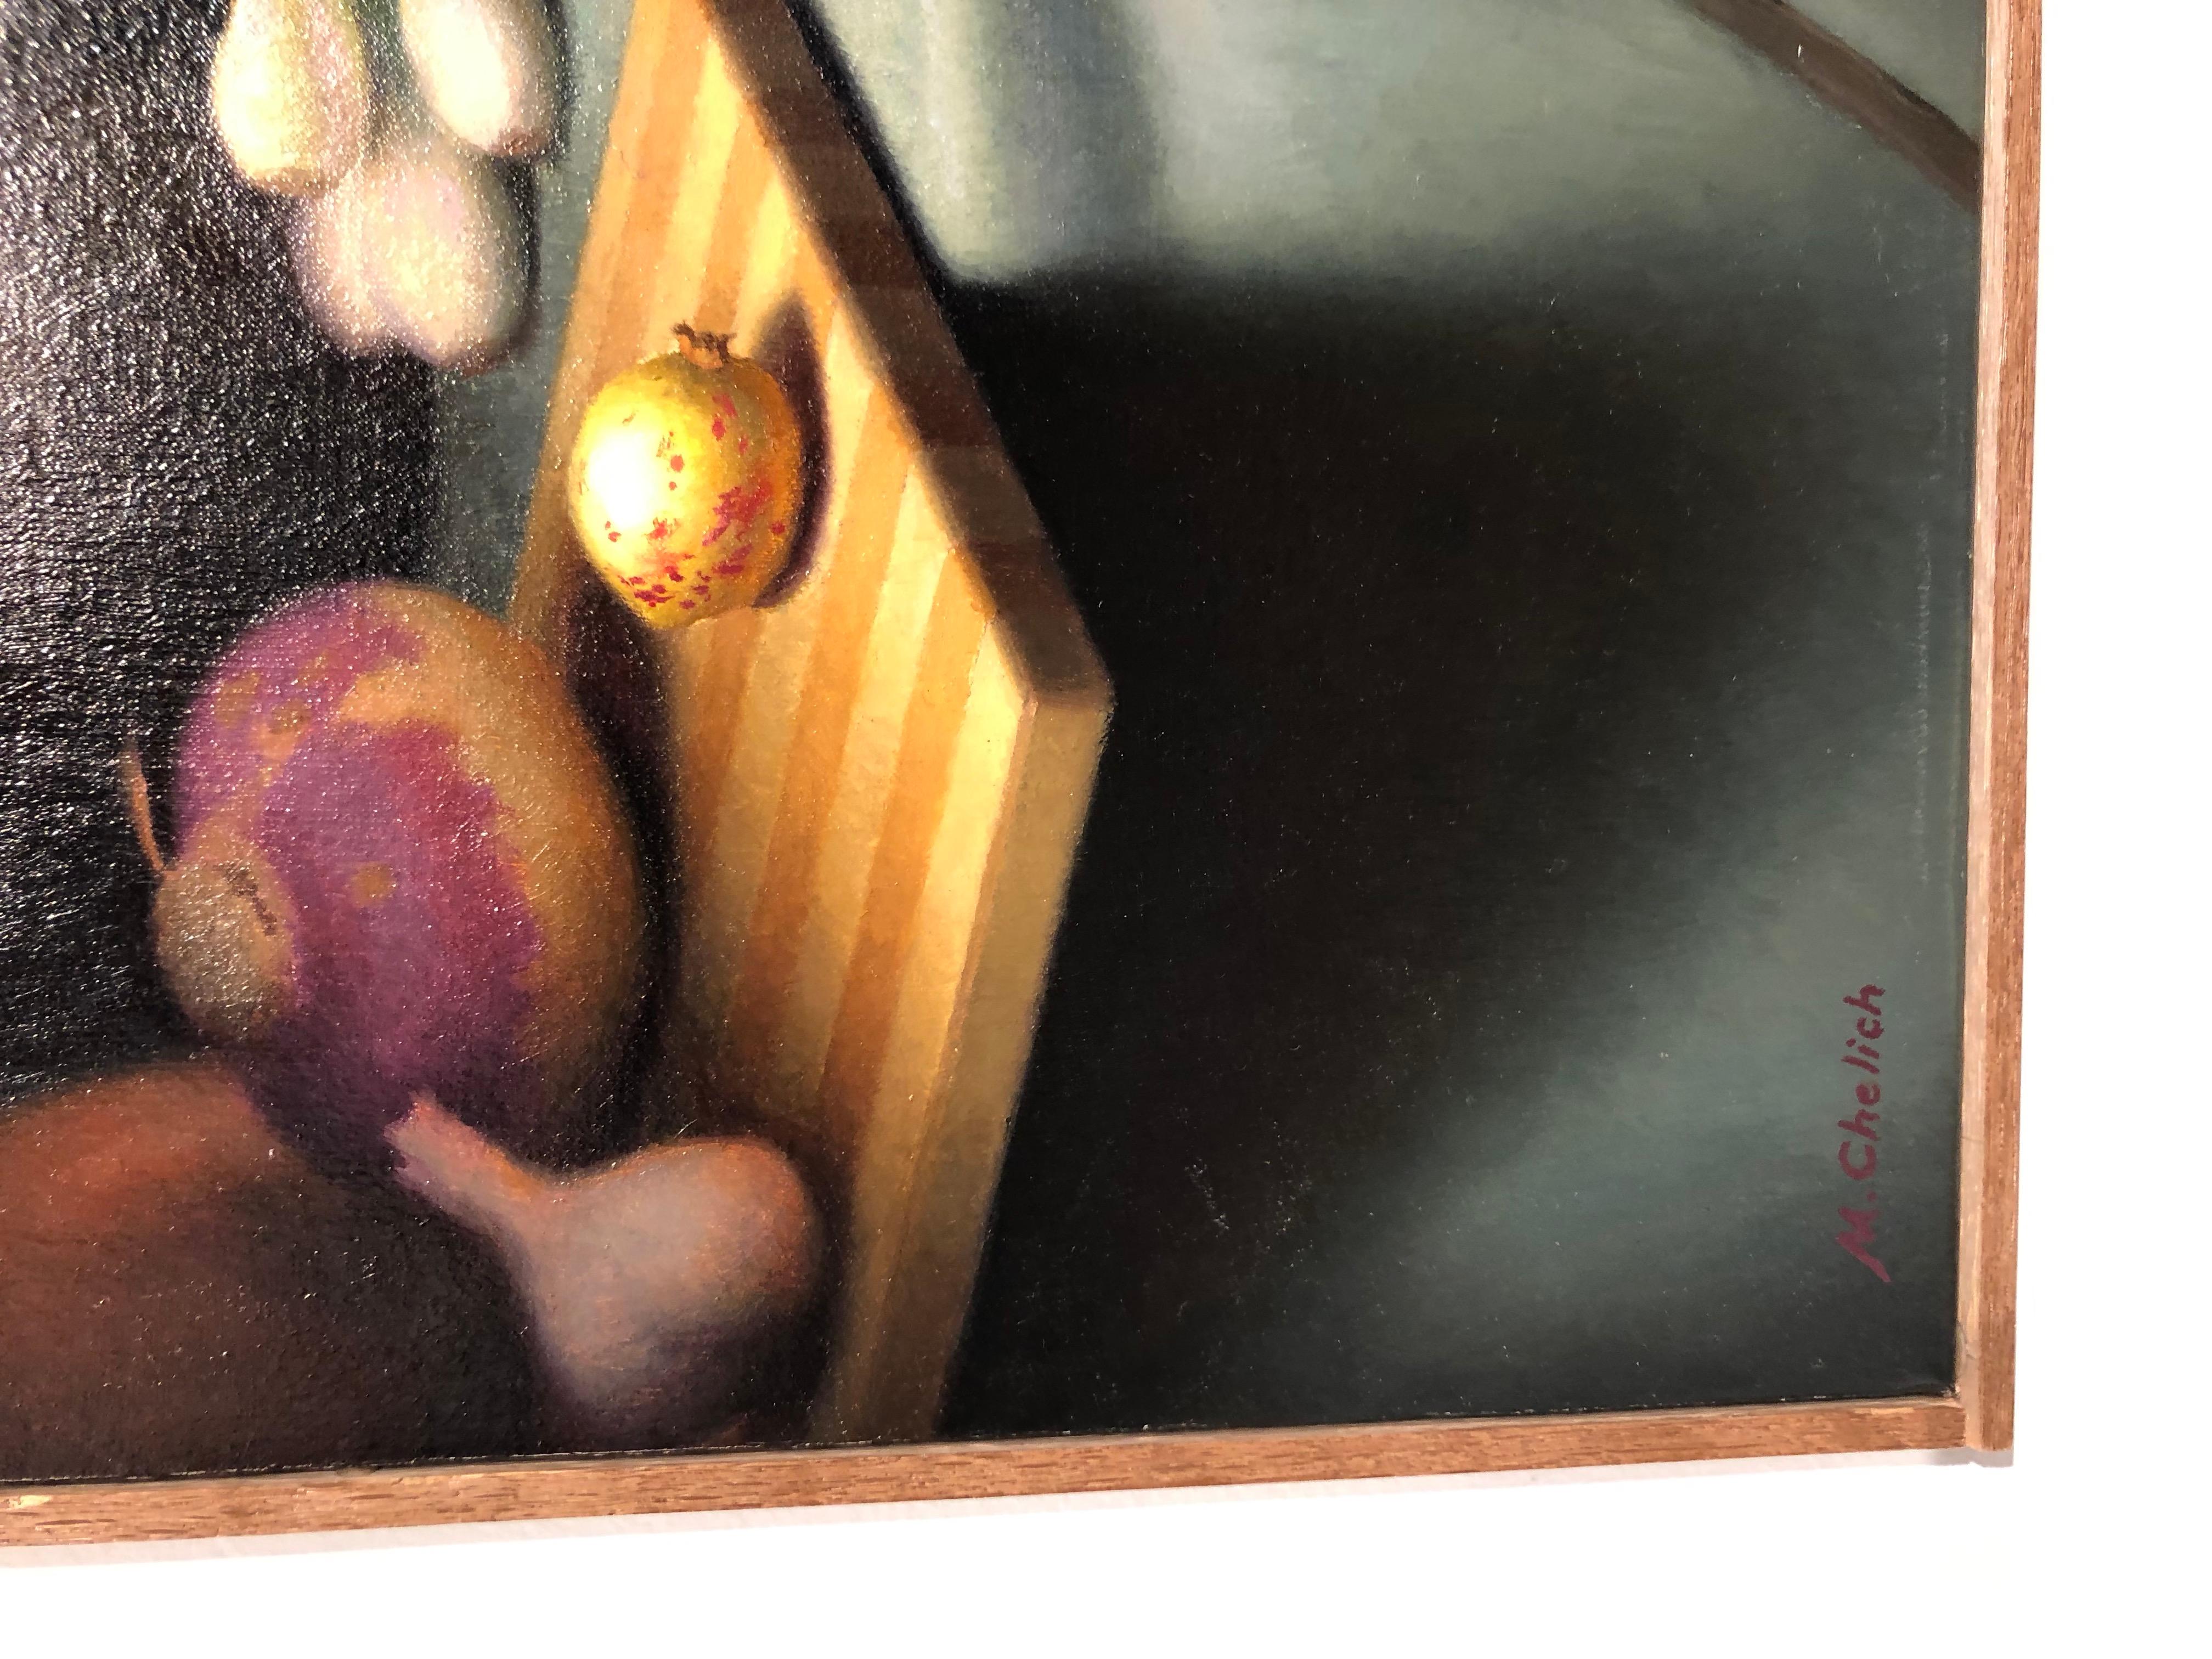 Hand-Painted Still Life with Turnips, Original Oil Painting on Canvas by Michael Chelich